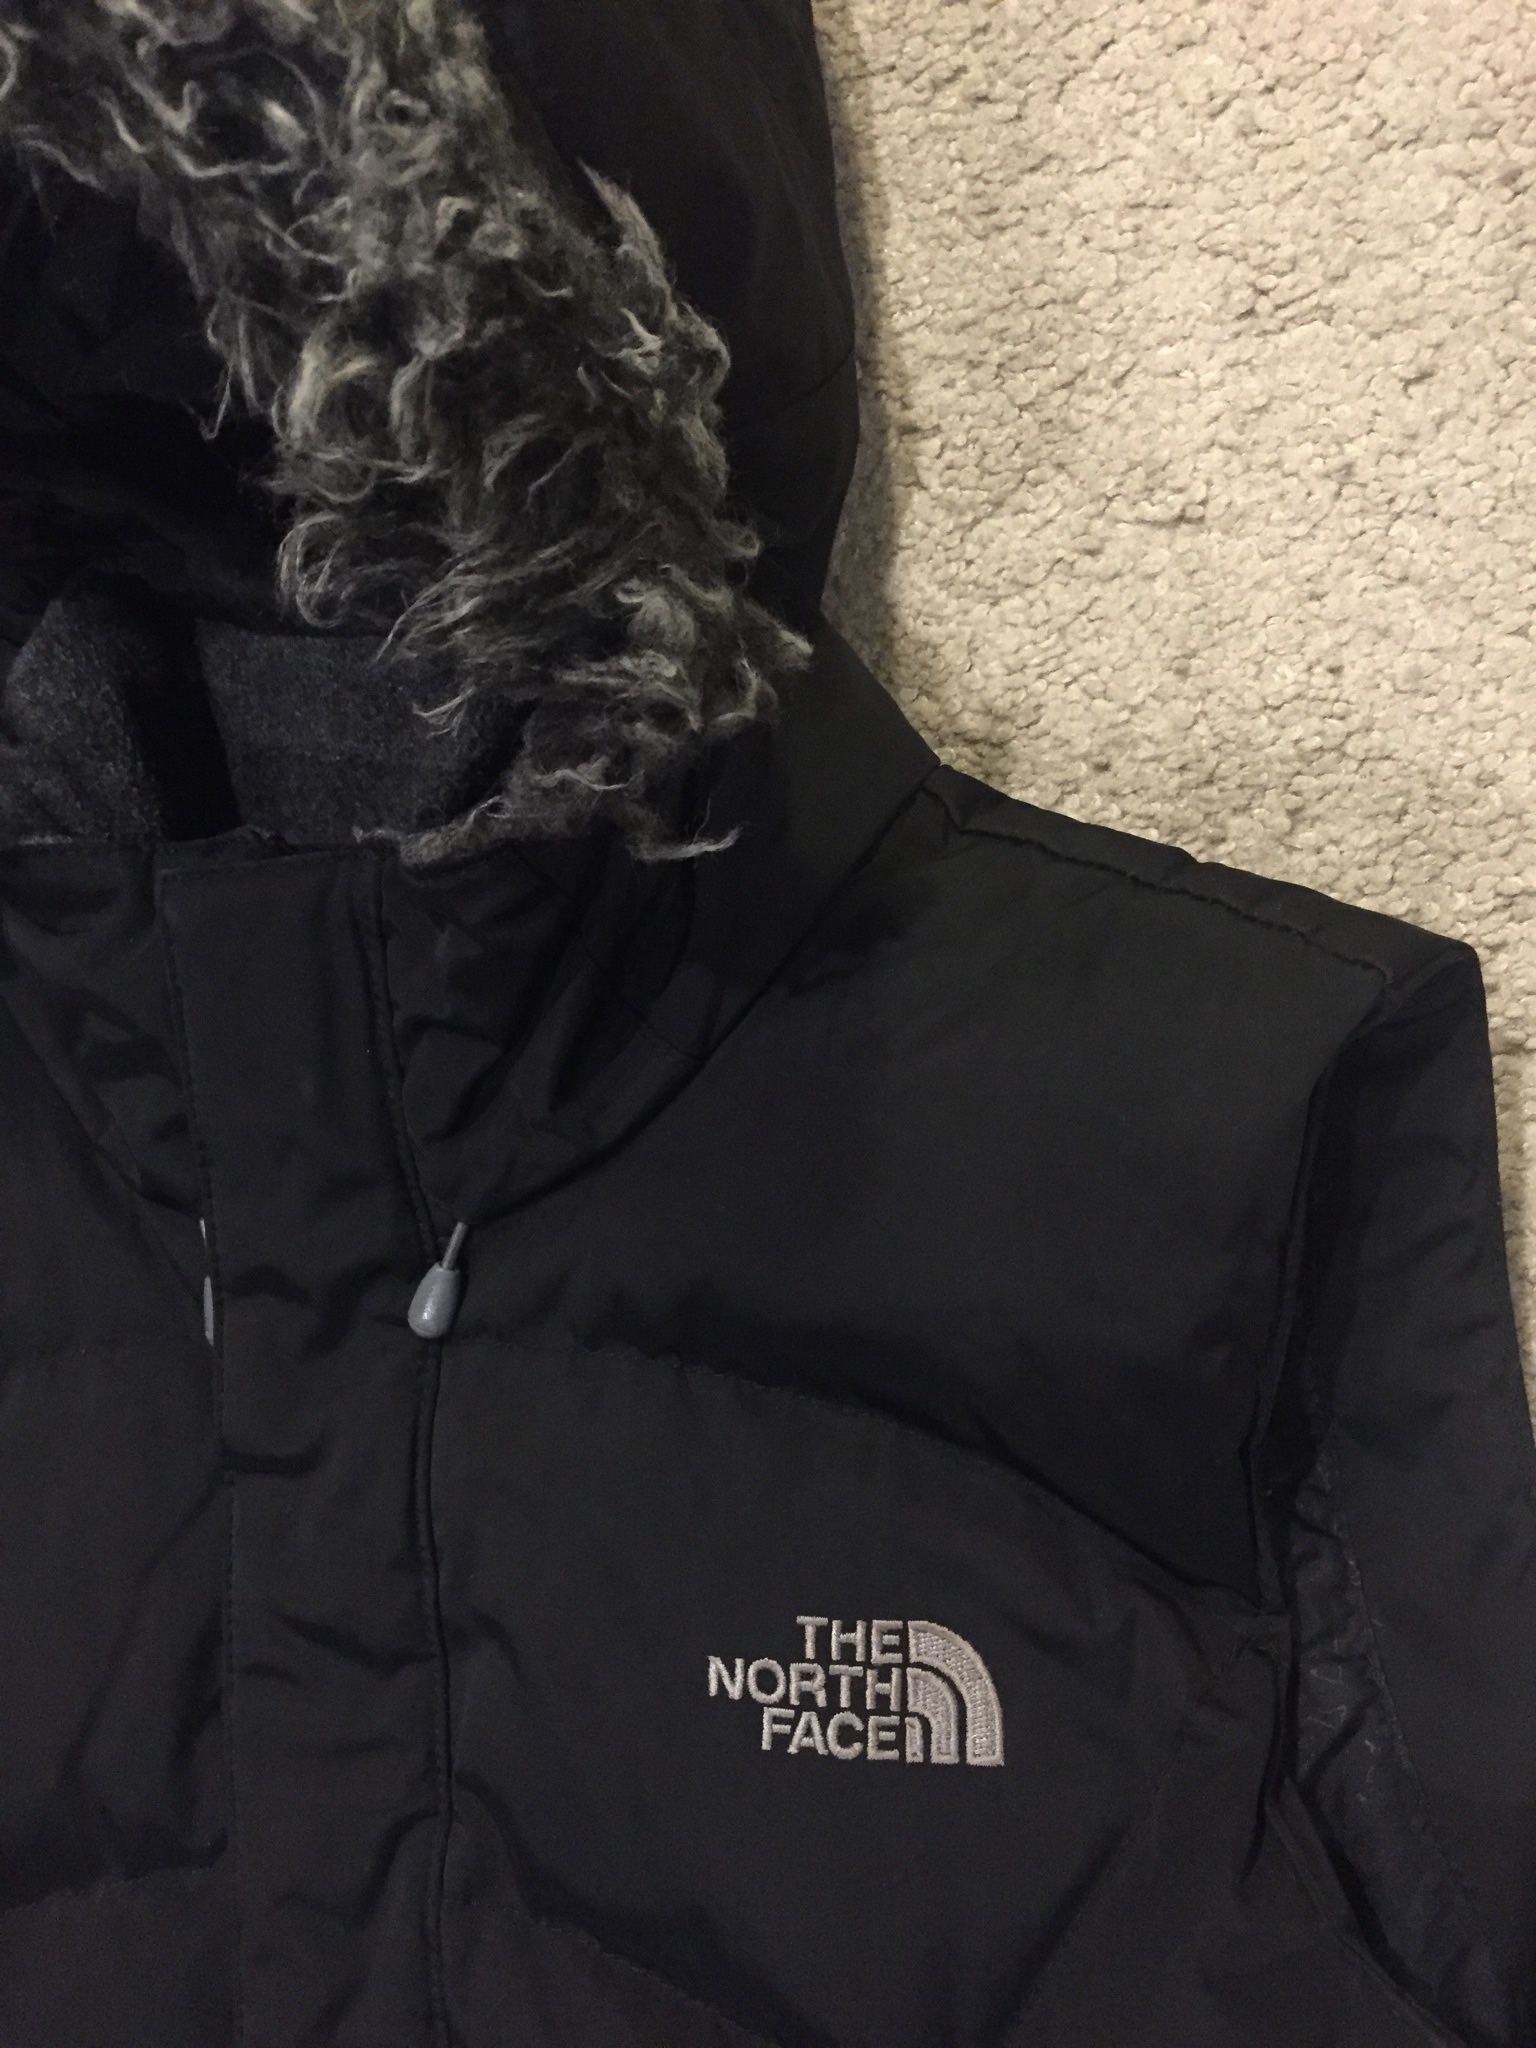 NORTH FACE / "PRODIGY" 600 Down Puffy Vest Coat Jacket w/ Fur Hood / SIZE: Women's Small / Excellent Condition!! / Black & Gold